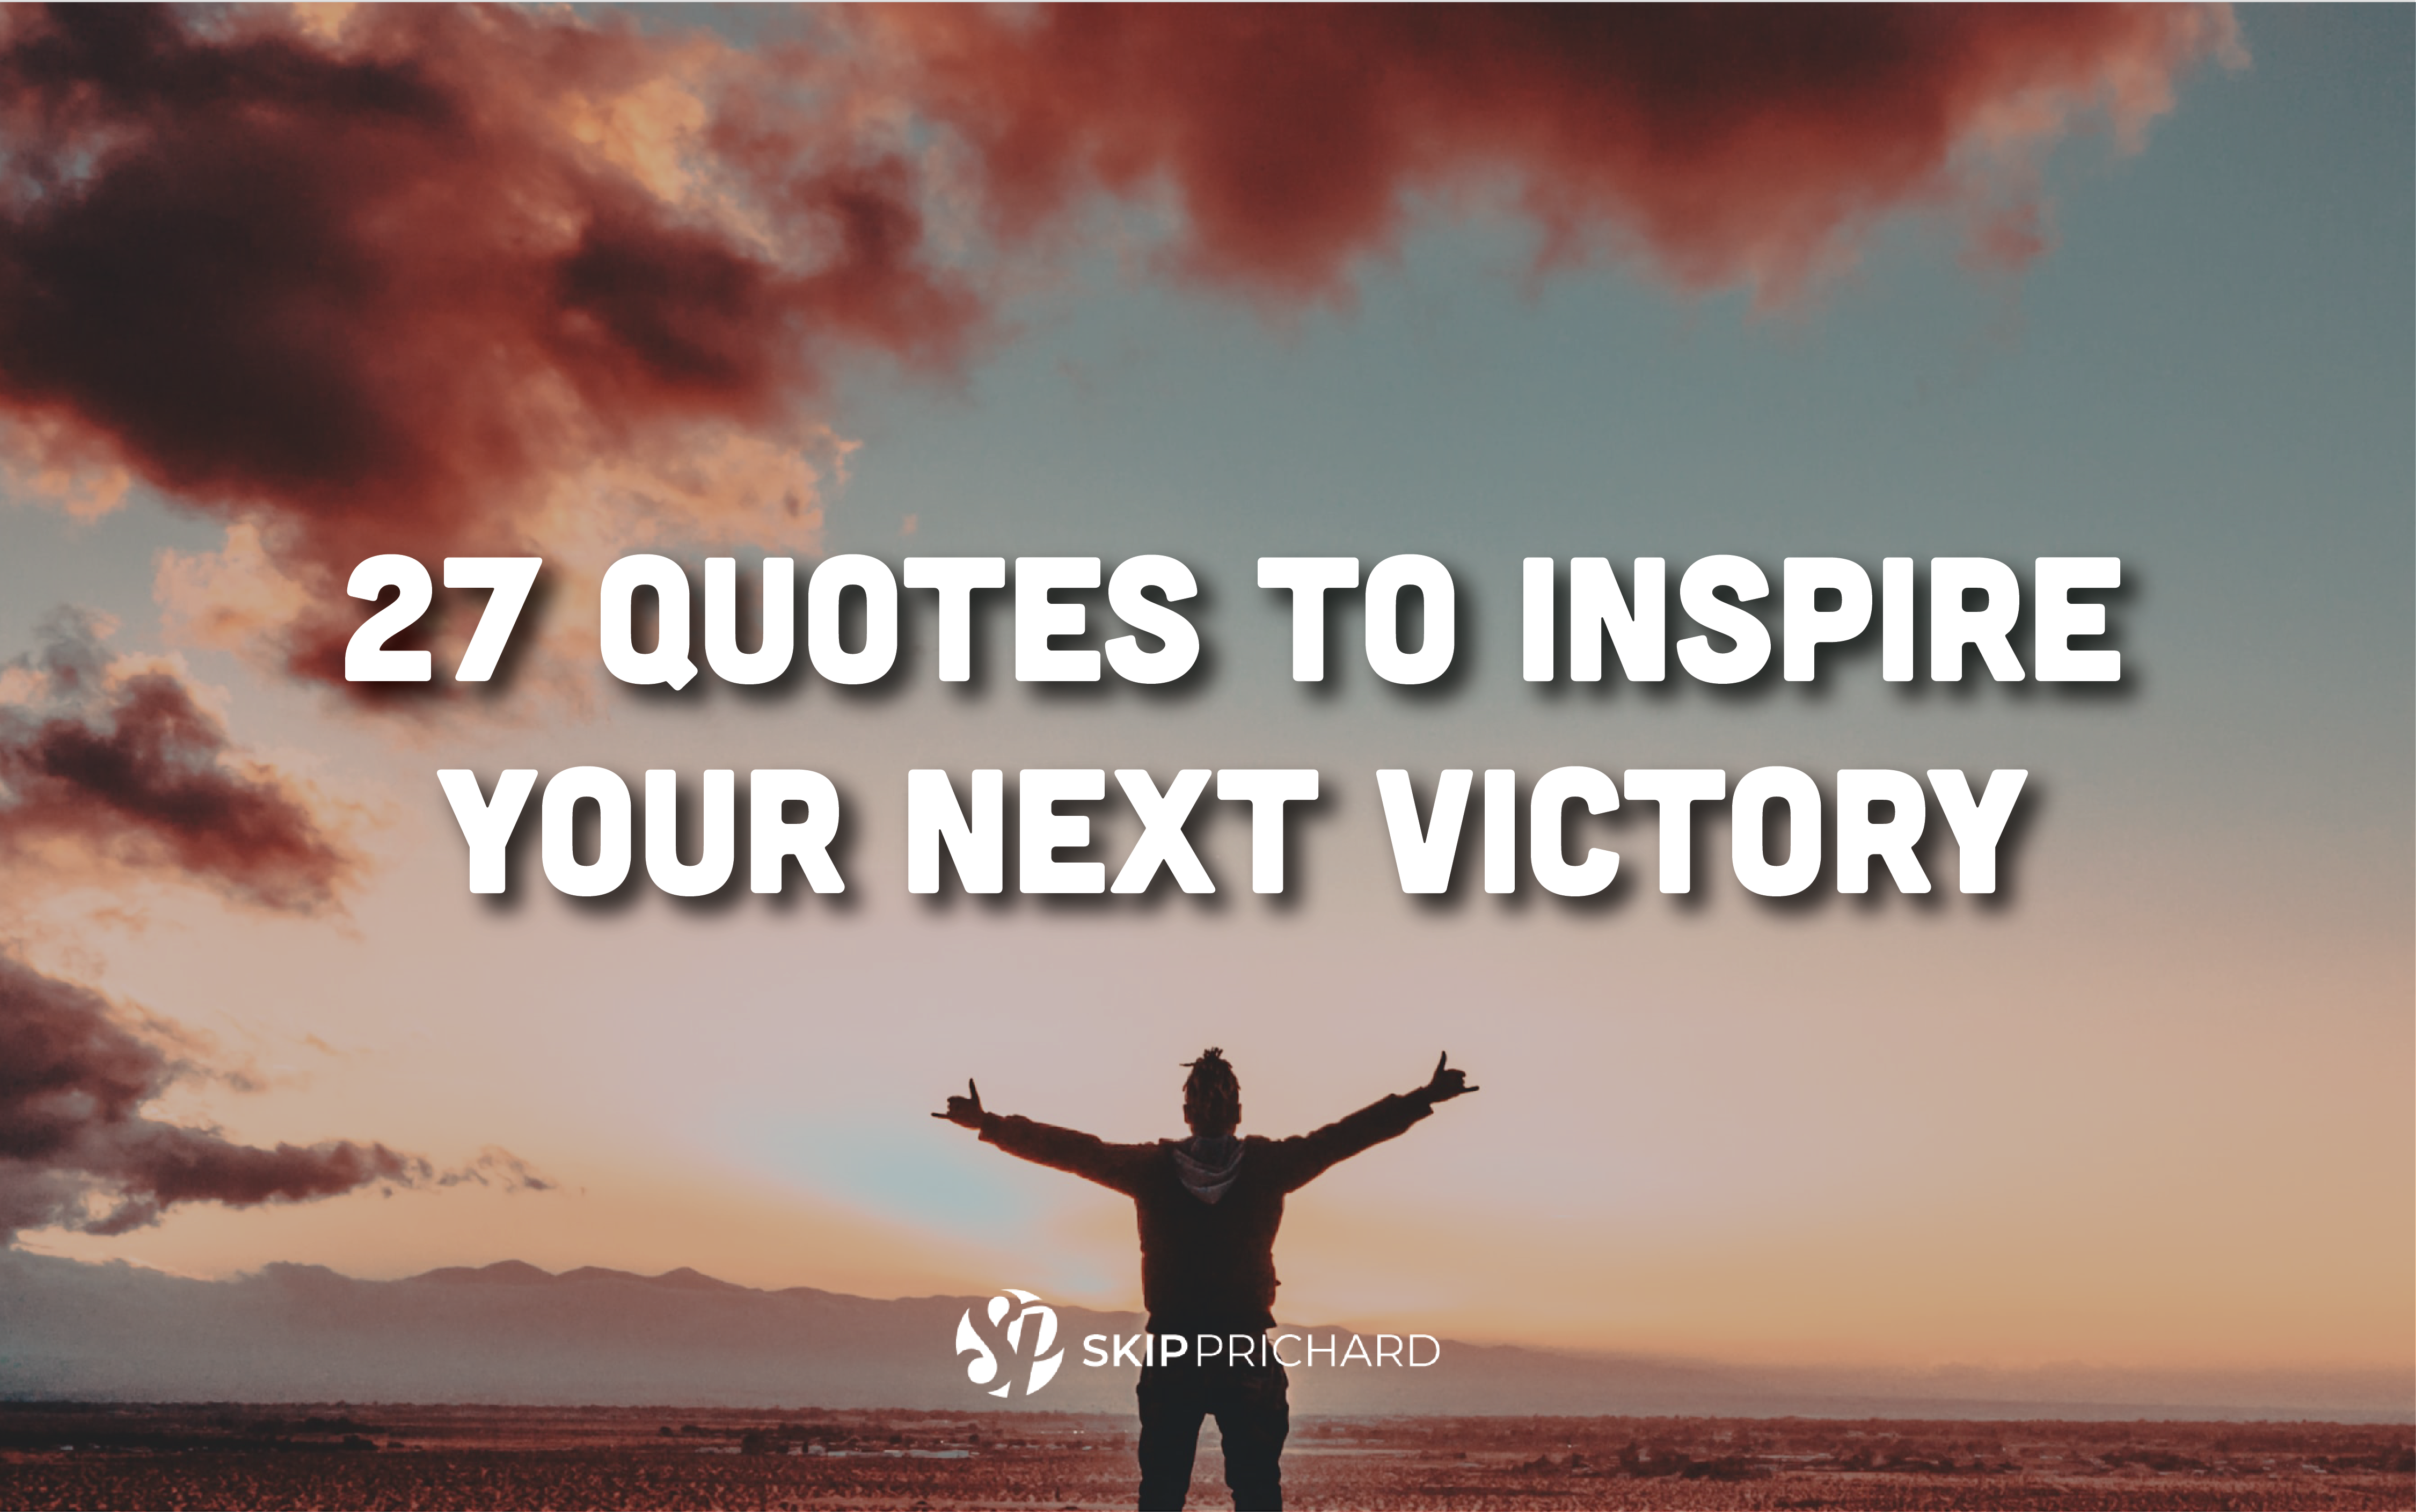 27 Quotes to Inspire Your Next Victory